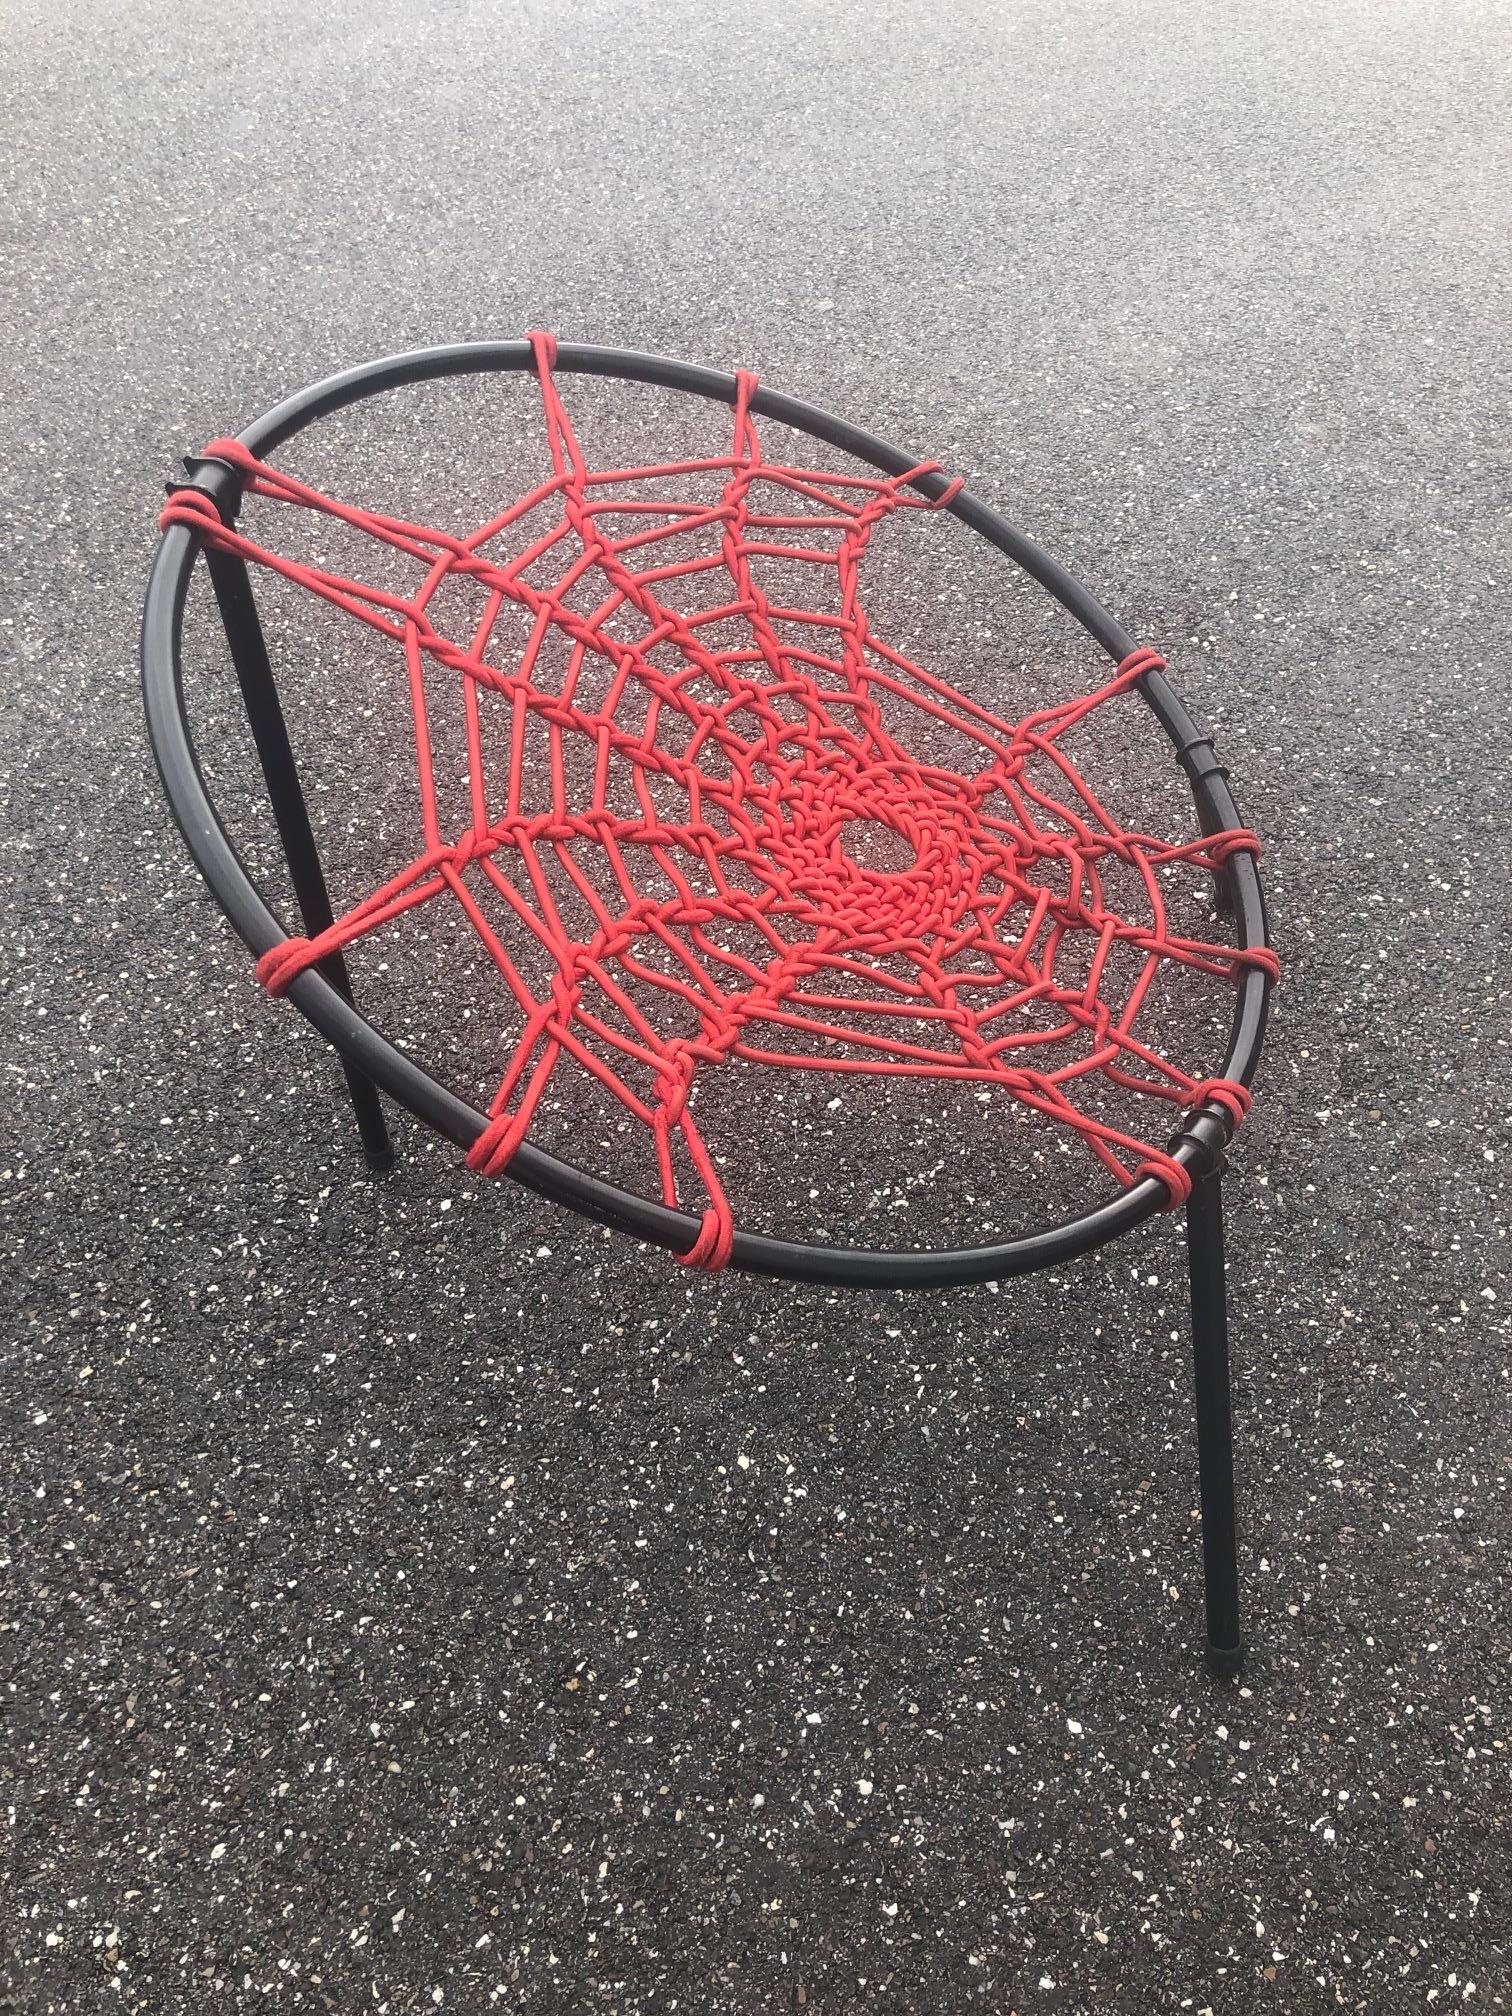 Mid-Century Modern Midcentury Plan O Hoffer Spider Chair / Lounge Patio Chair French, circa 1958 For Sale